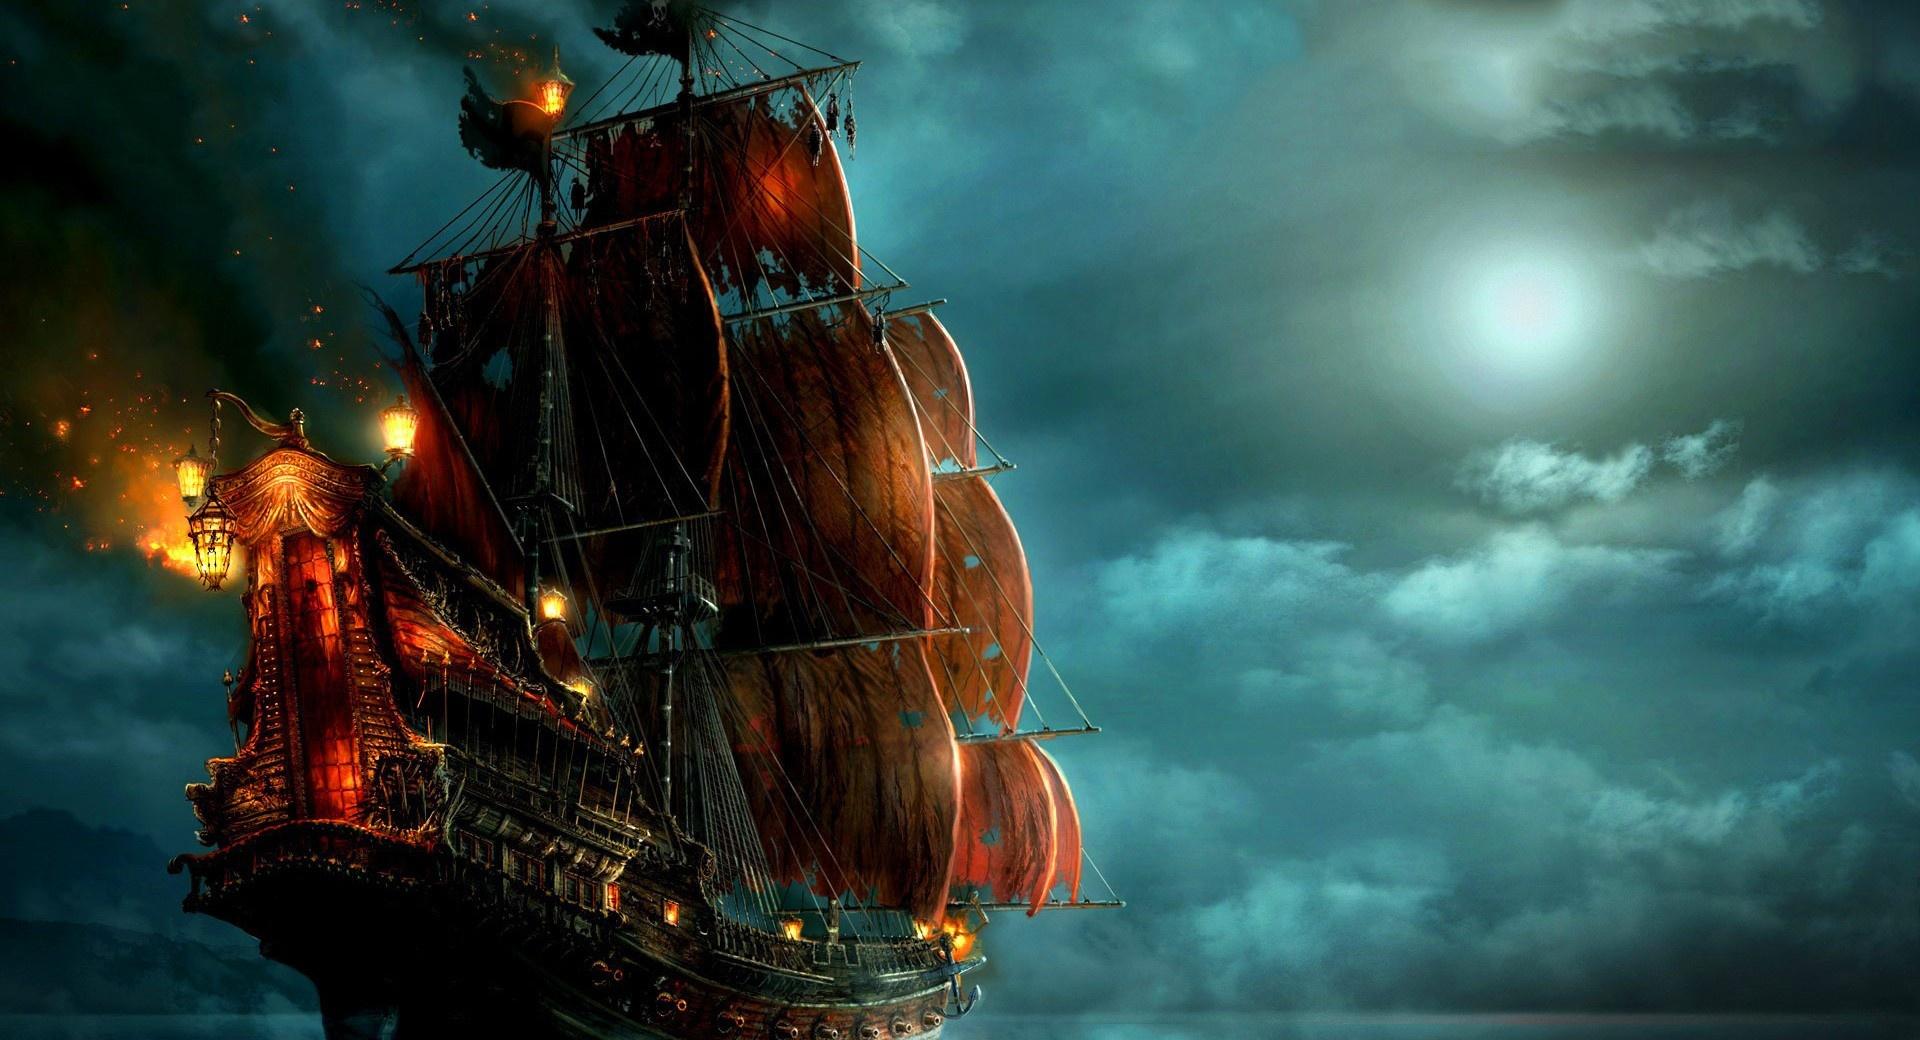 Sailing Ship Painting wallpapers HD quality